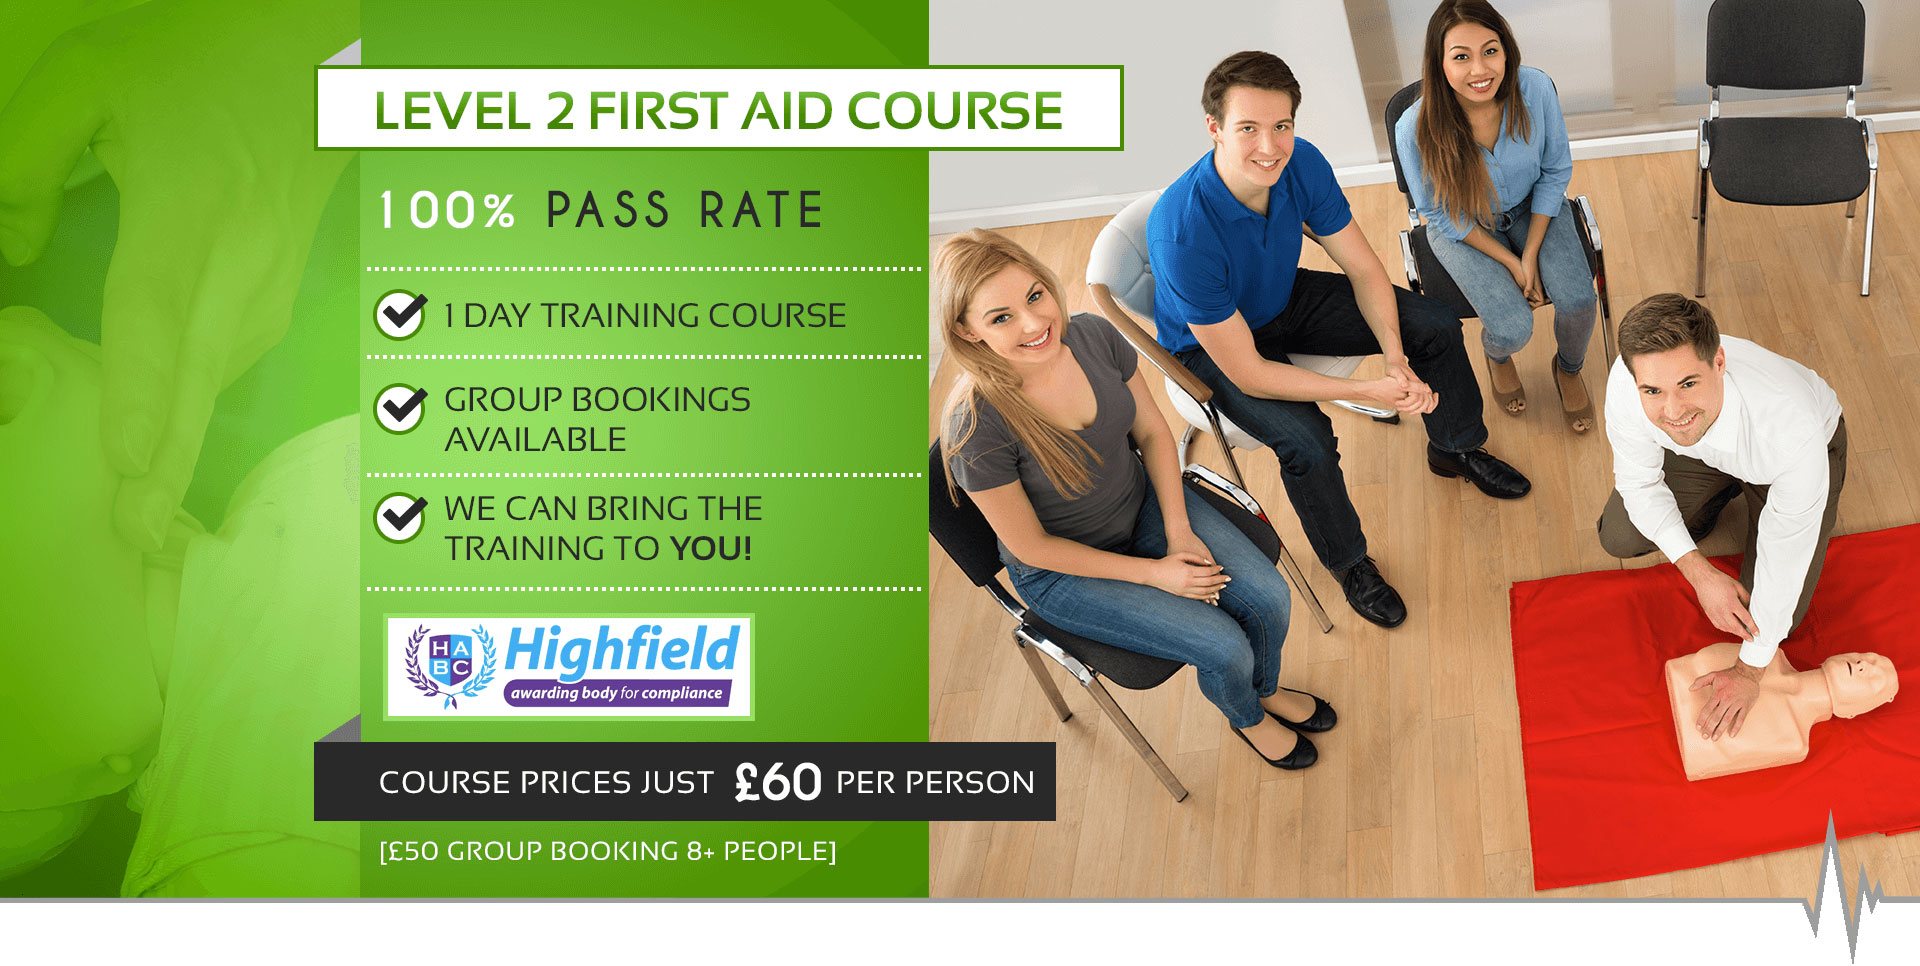 Why First Aid Course?